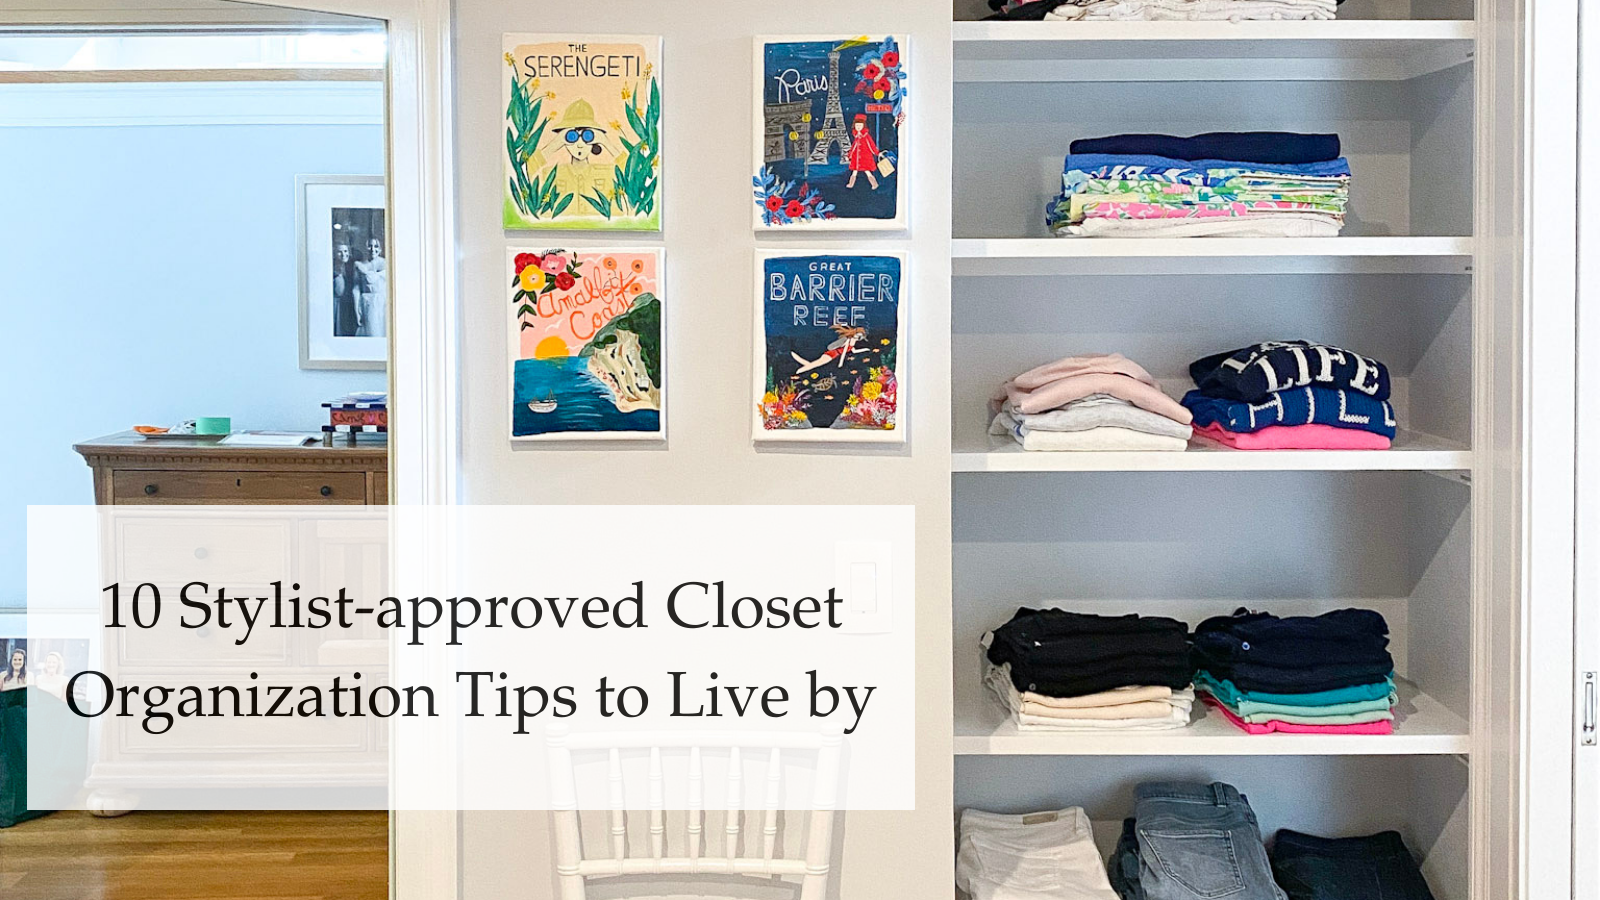 Linen Closet Organization with Baskets: A simple way to eliminate visual  clutter